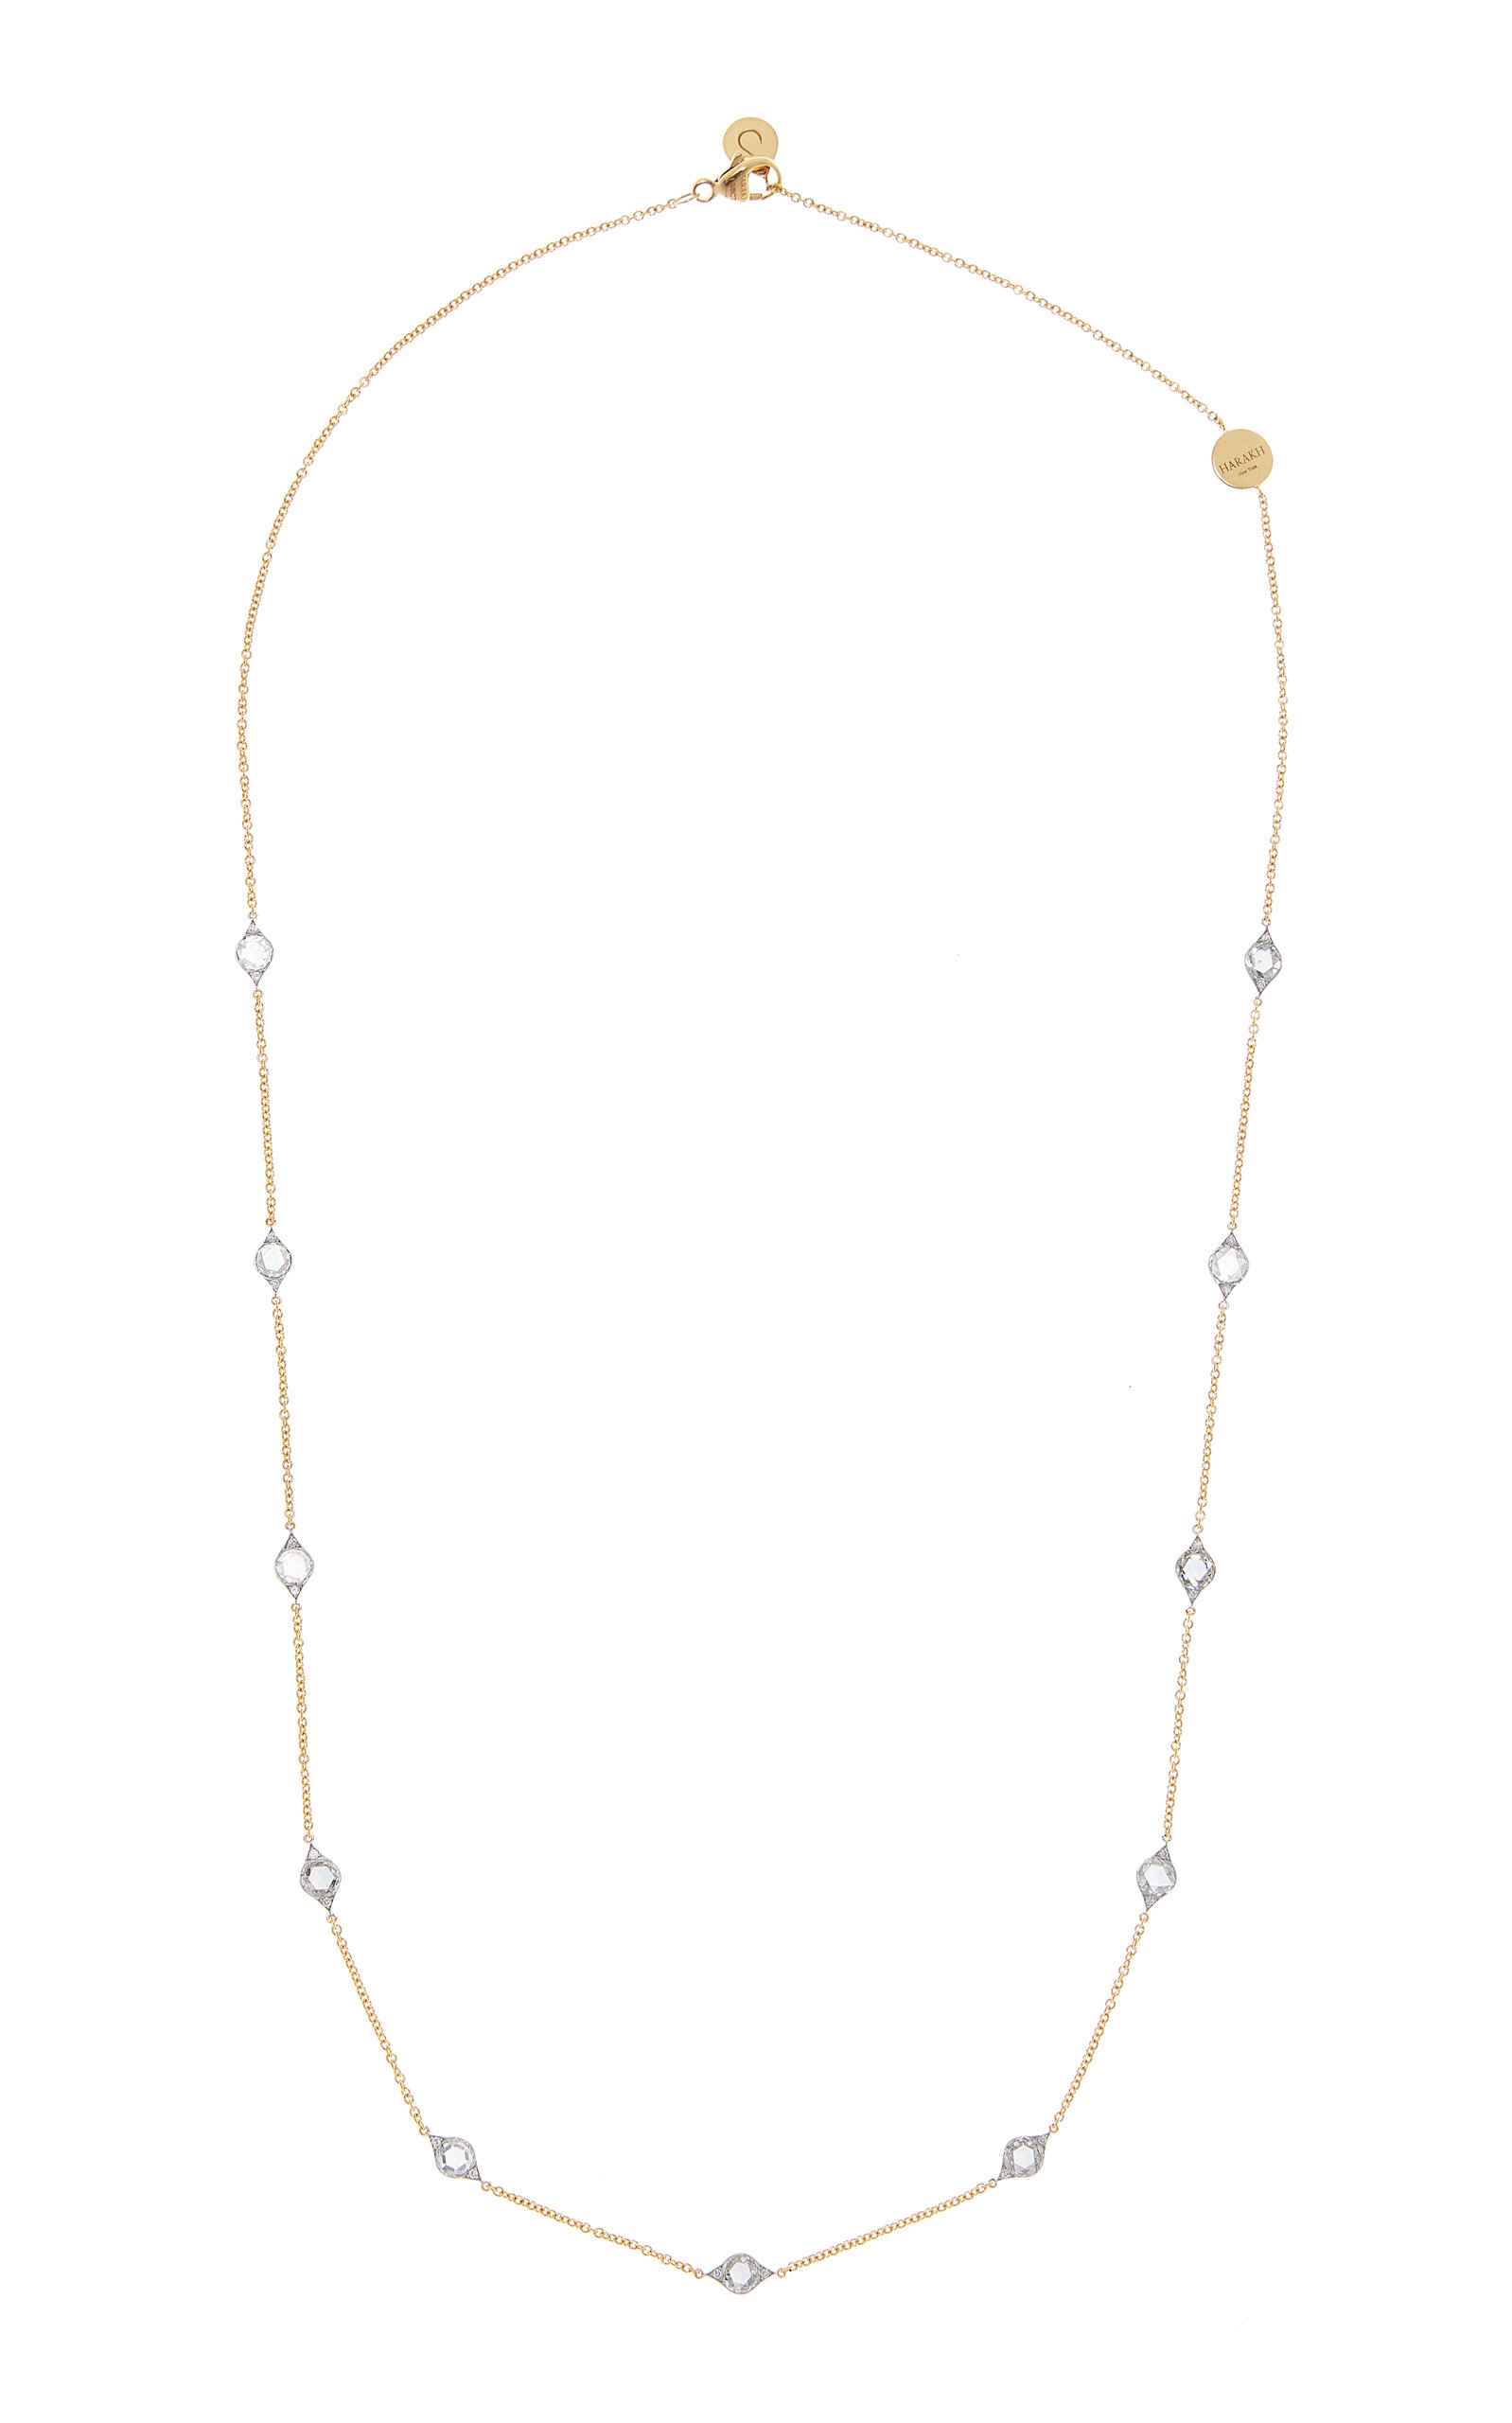 Haveli 18K White and Yellow Gold Diamond Necklace